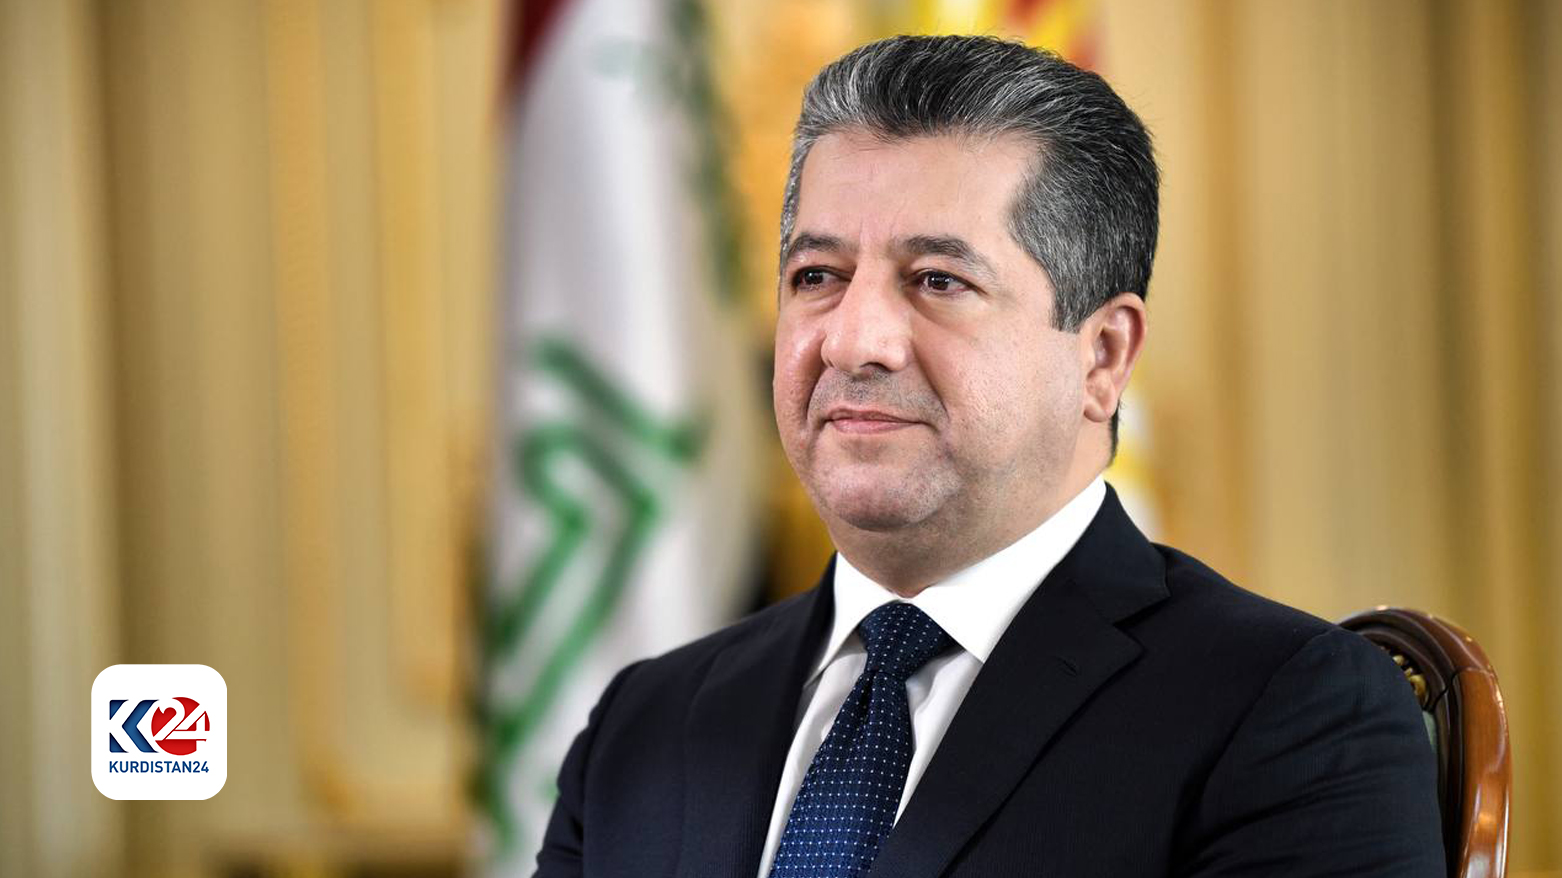 Iraqi government welcomes the date set for Kurdistan Region parliamentary elections